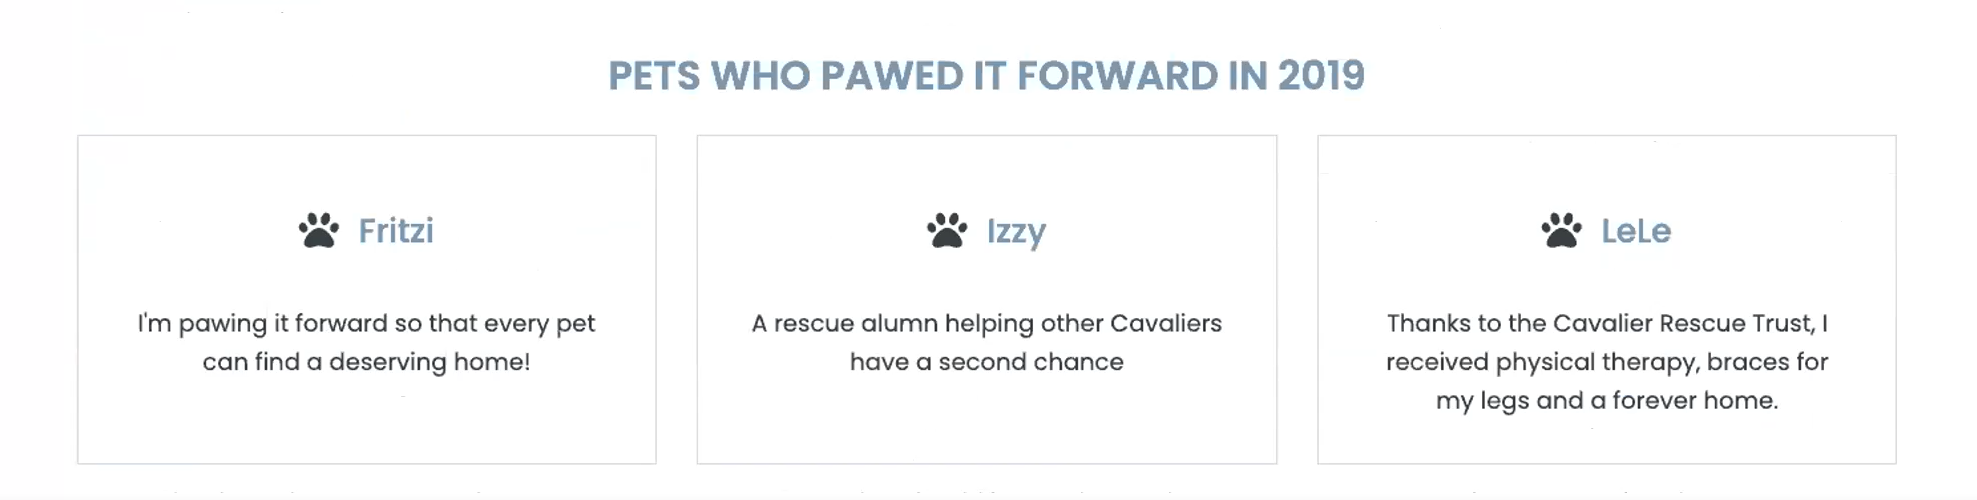 A donor wall shows the "Pets who pawed it forward in 2019."